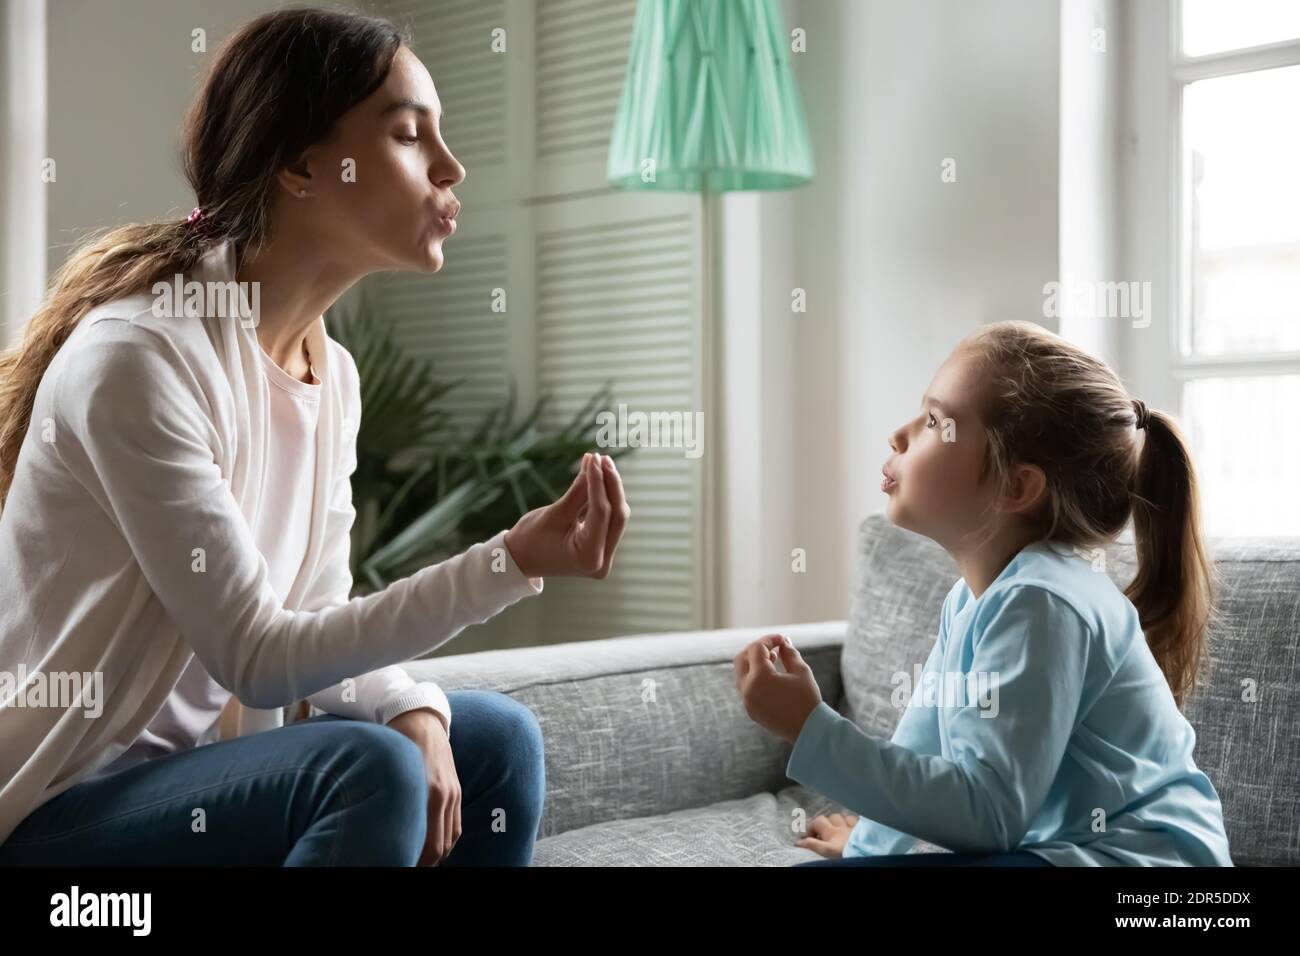 Close up little girl involved in lesson with speech therapist Stock Photo